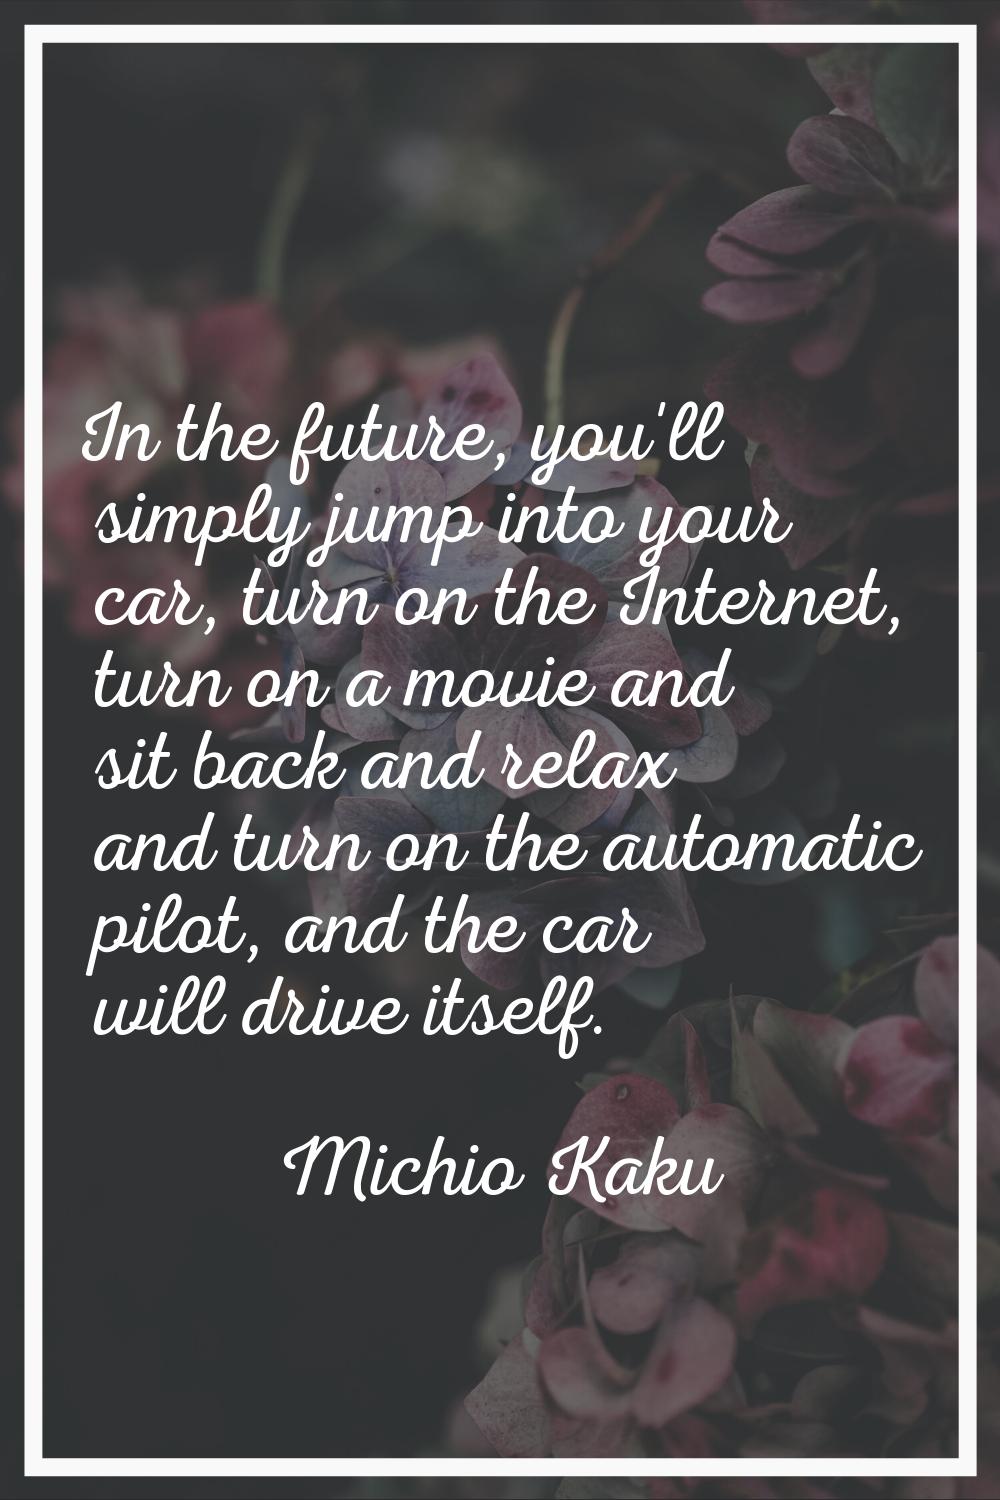 In the future, you'll simply jump into your car, turn on the Internet, turn on a movie and sit back